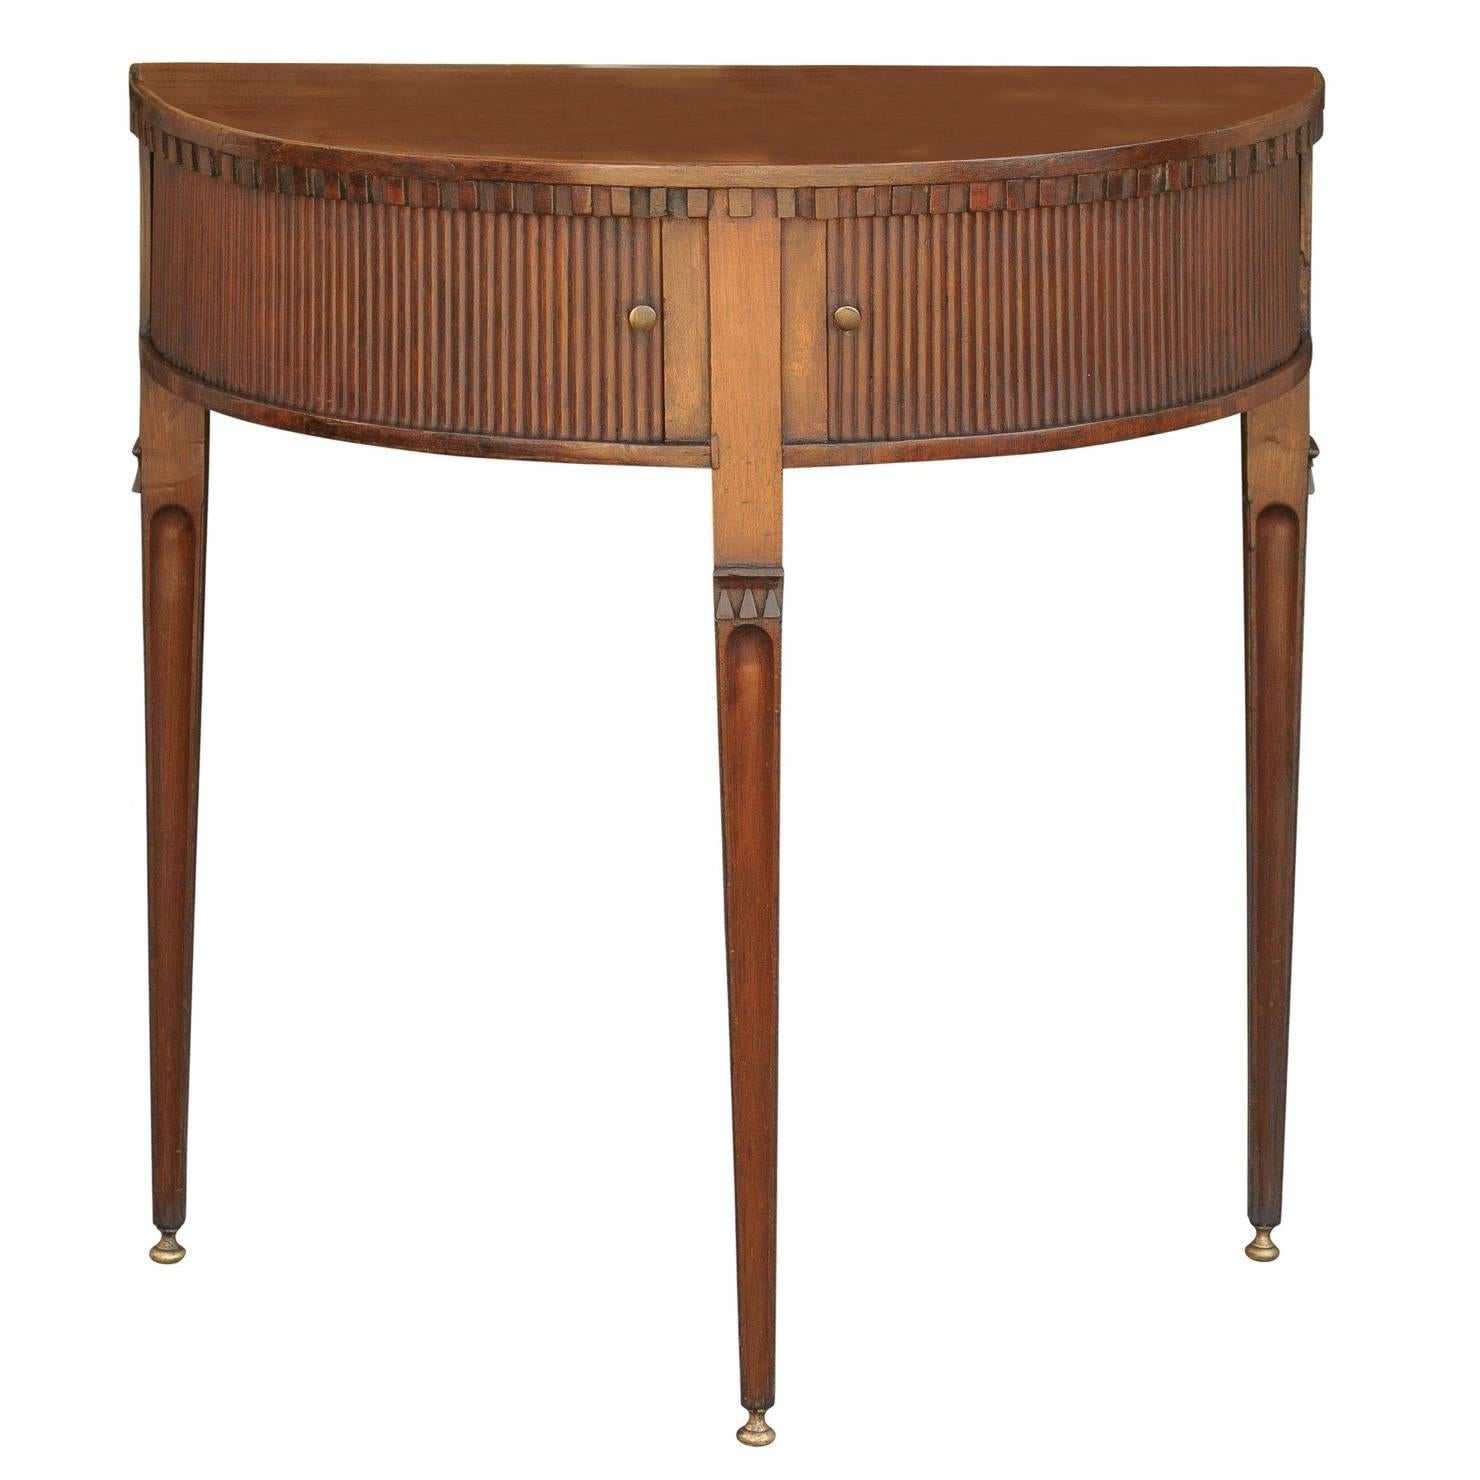 English Mahogany Neoclassical Demi-lune Console Table with Tambour Sliding Doors